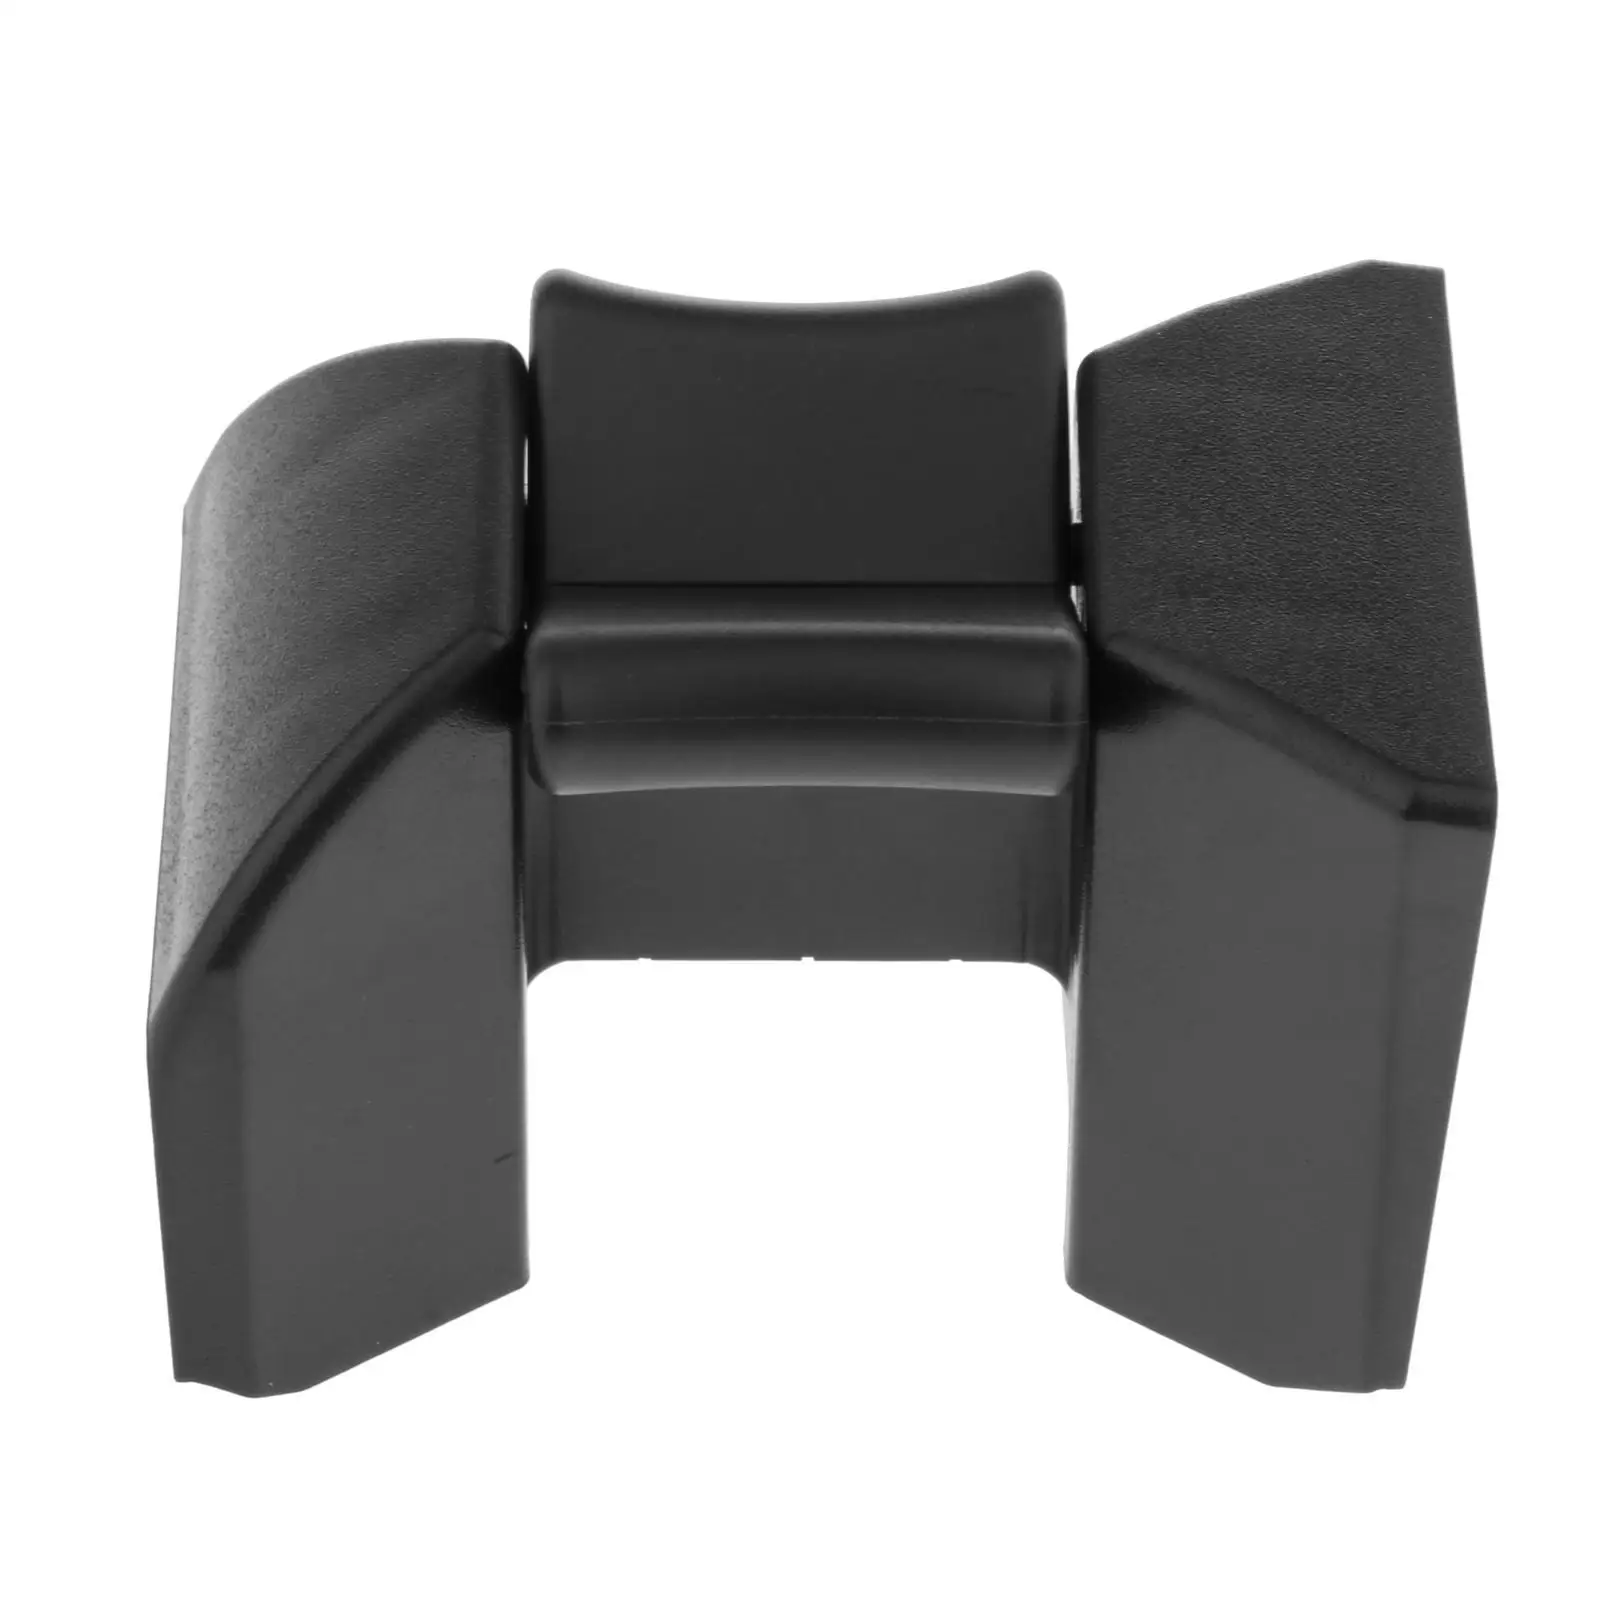 1pc Center Console Cup Holder Insert Divider Part Fit for Toyota Lexus GS 2005-2011, Durable and Practical Car Part